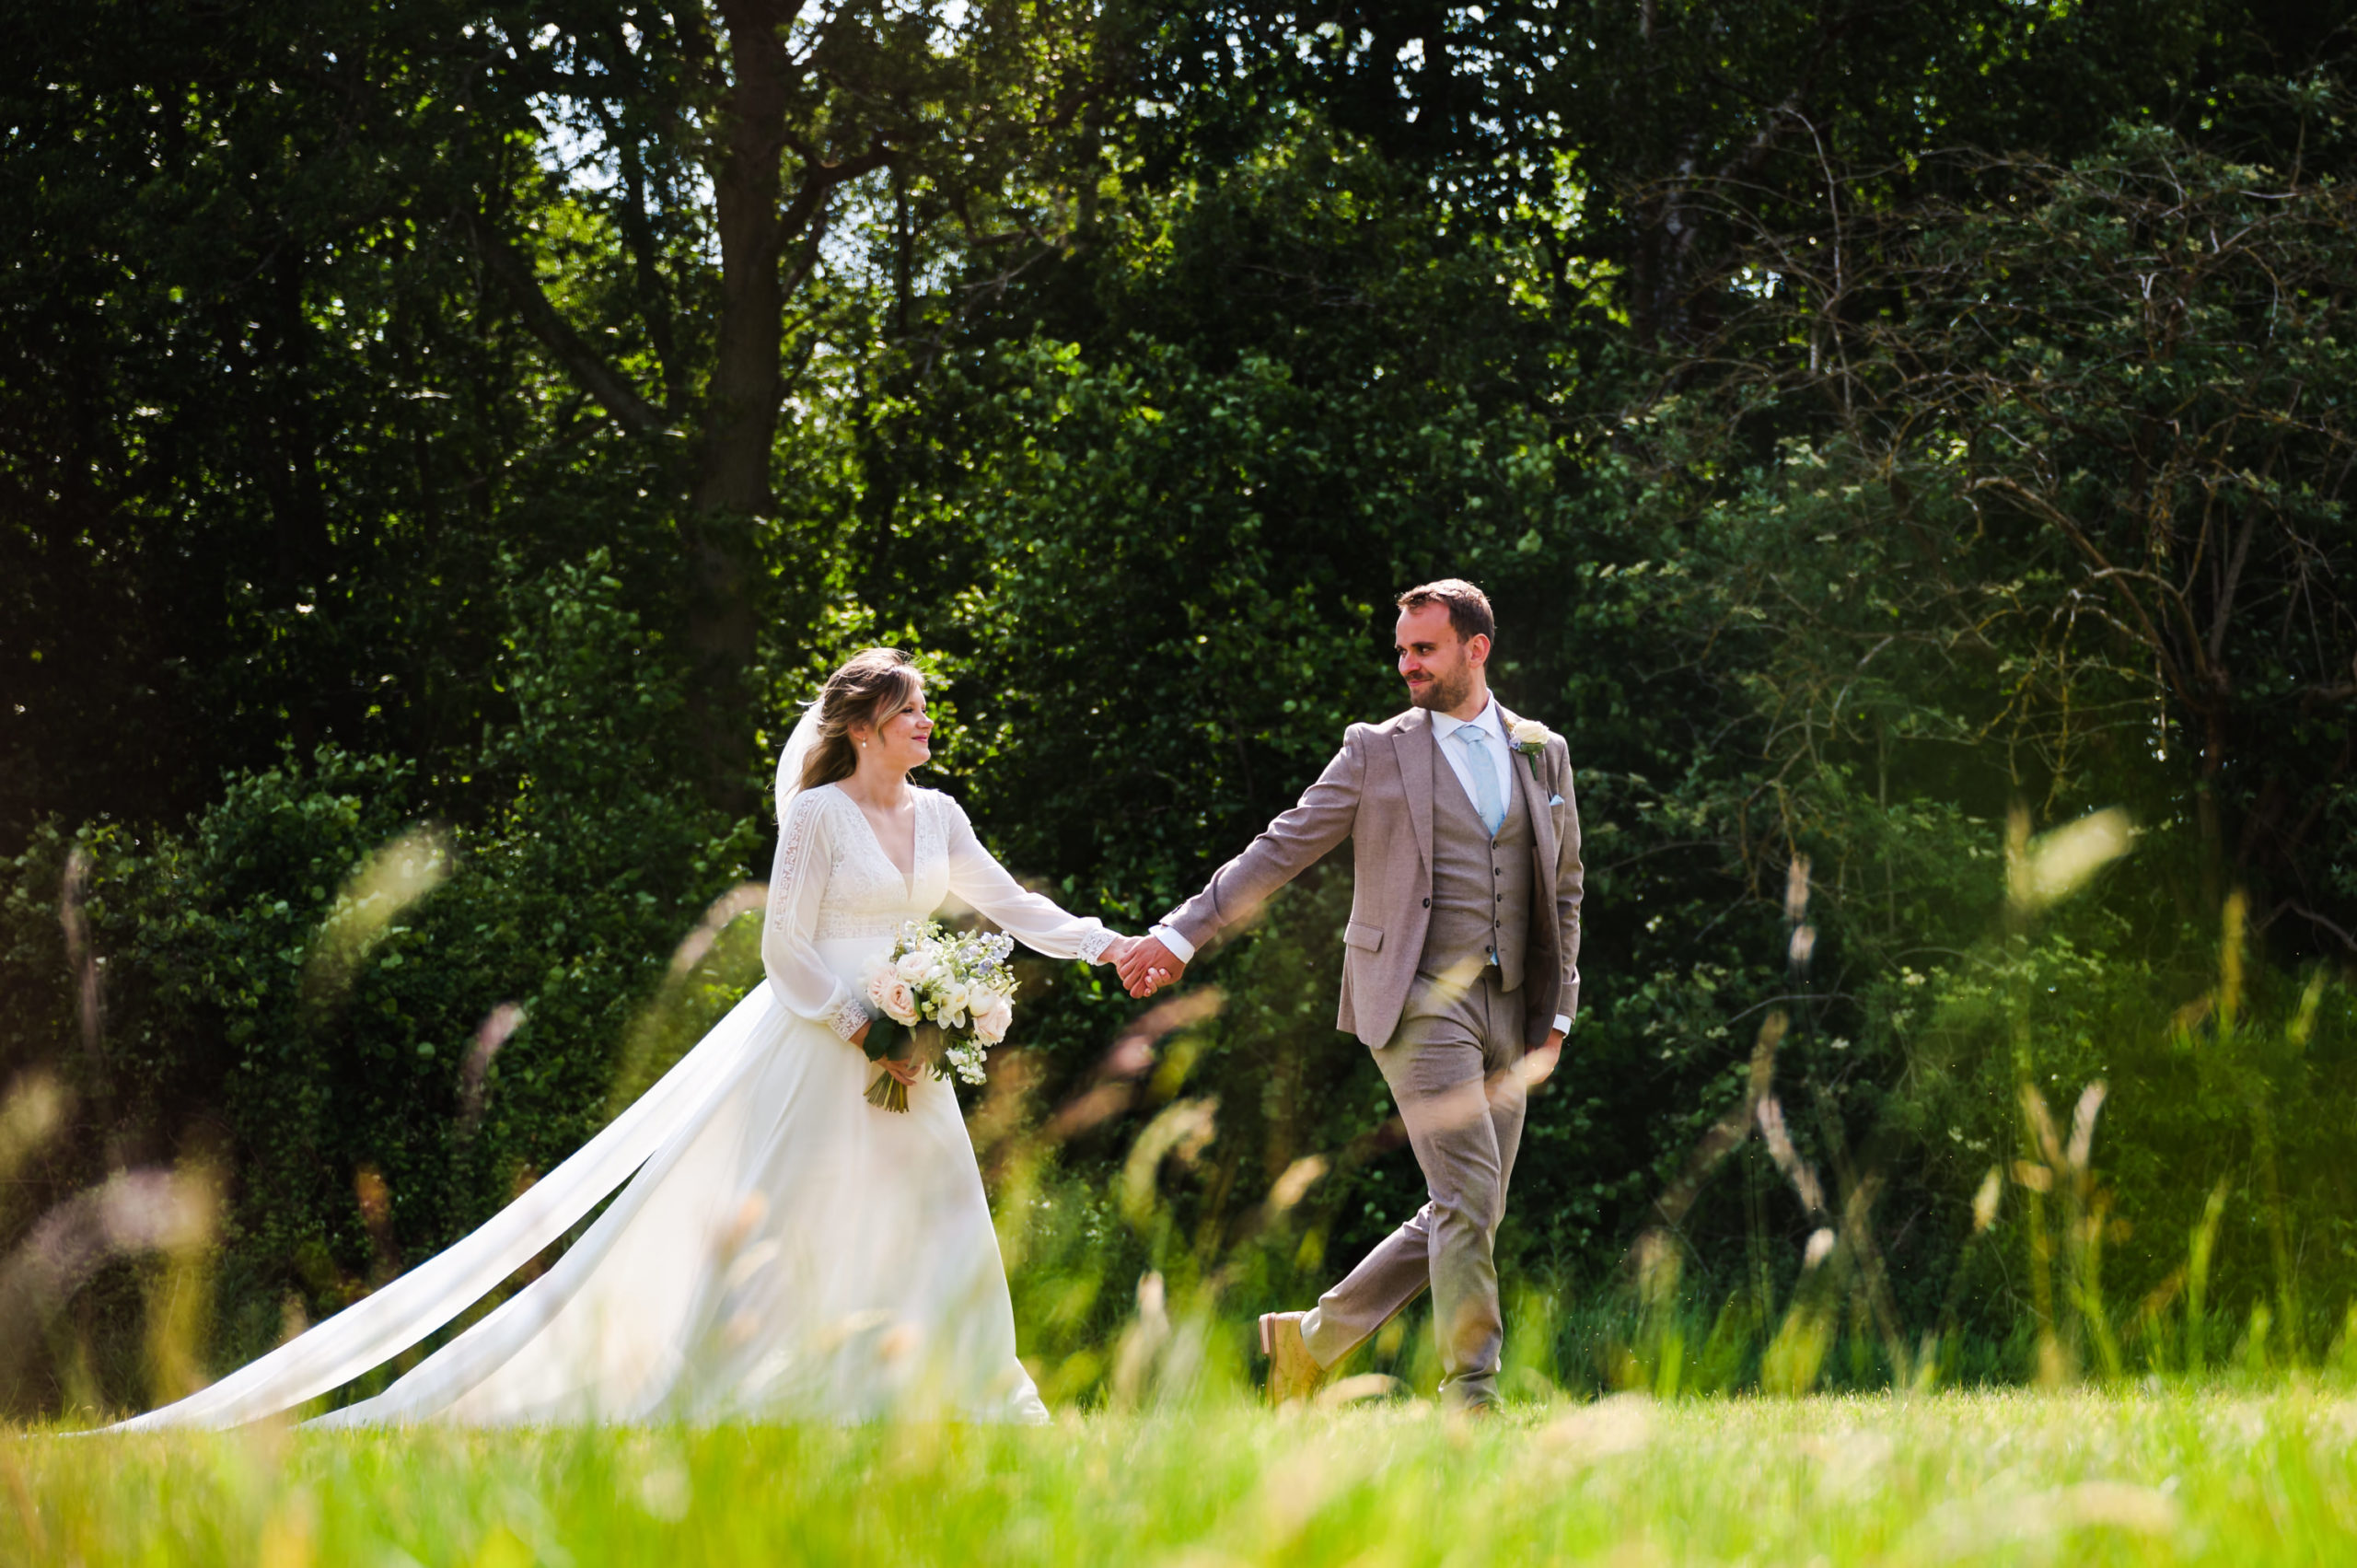 Bride and groom walking through a field